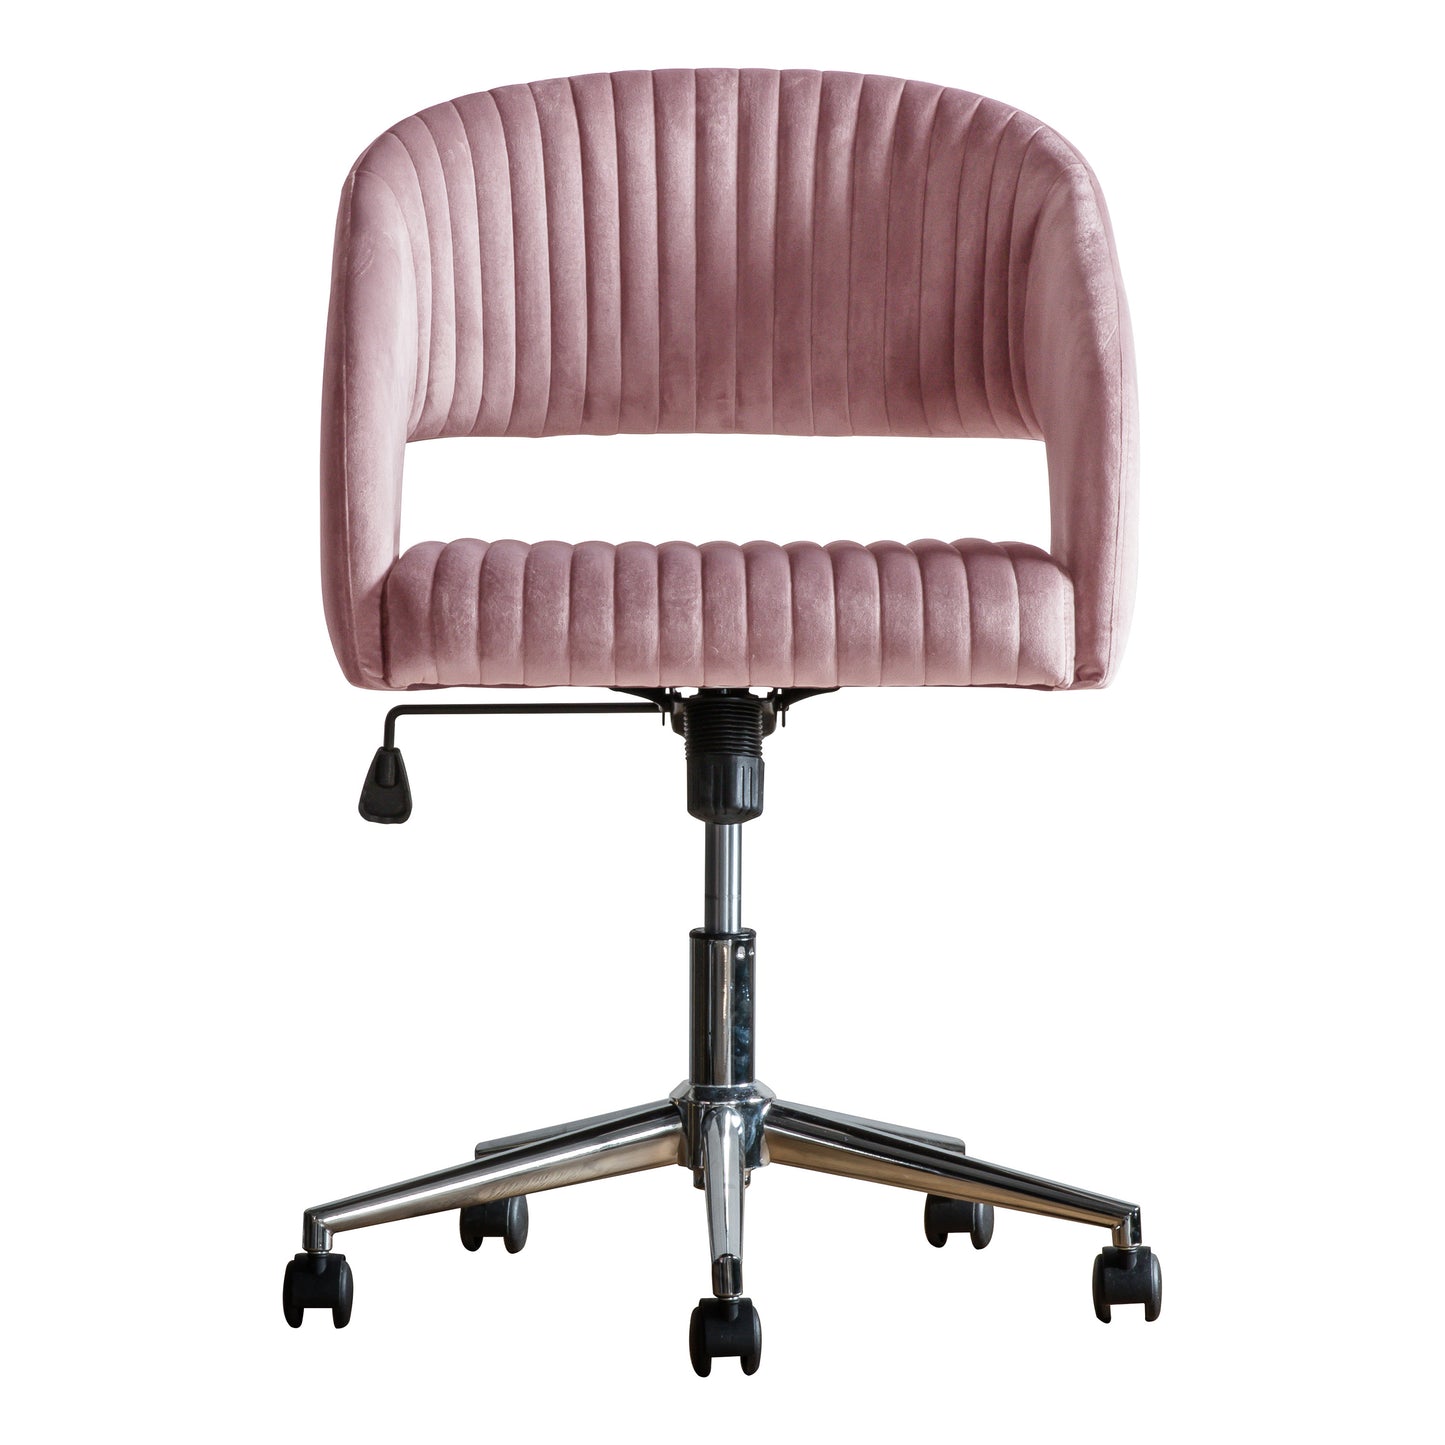 An Murray Swivel Chair Pink Velvet with a pink velvet upholstered seat, perfect for interior decor.